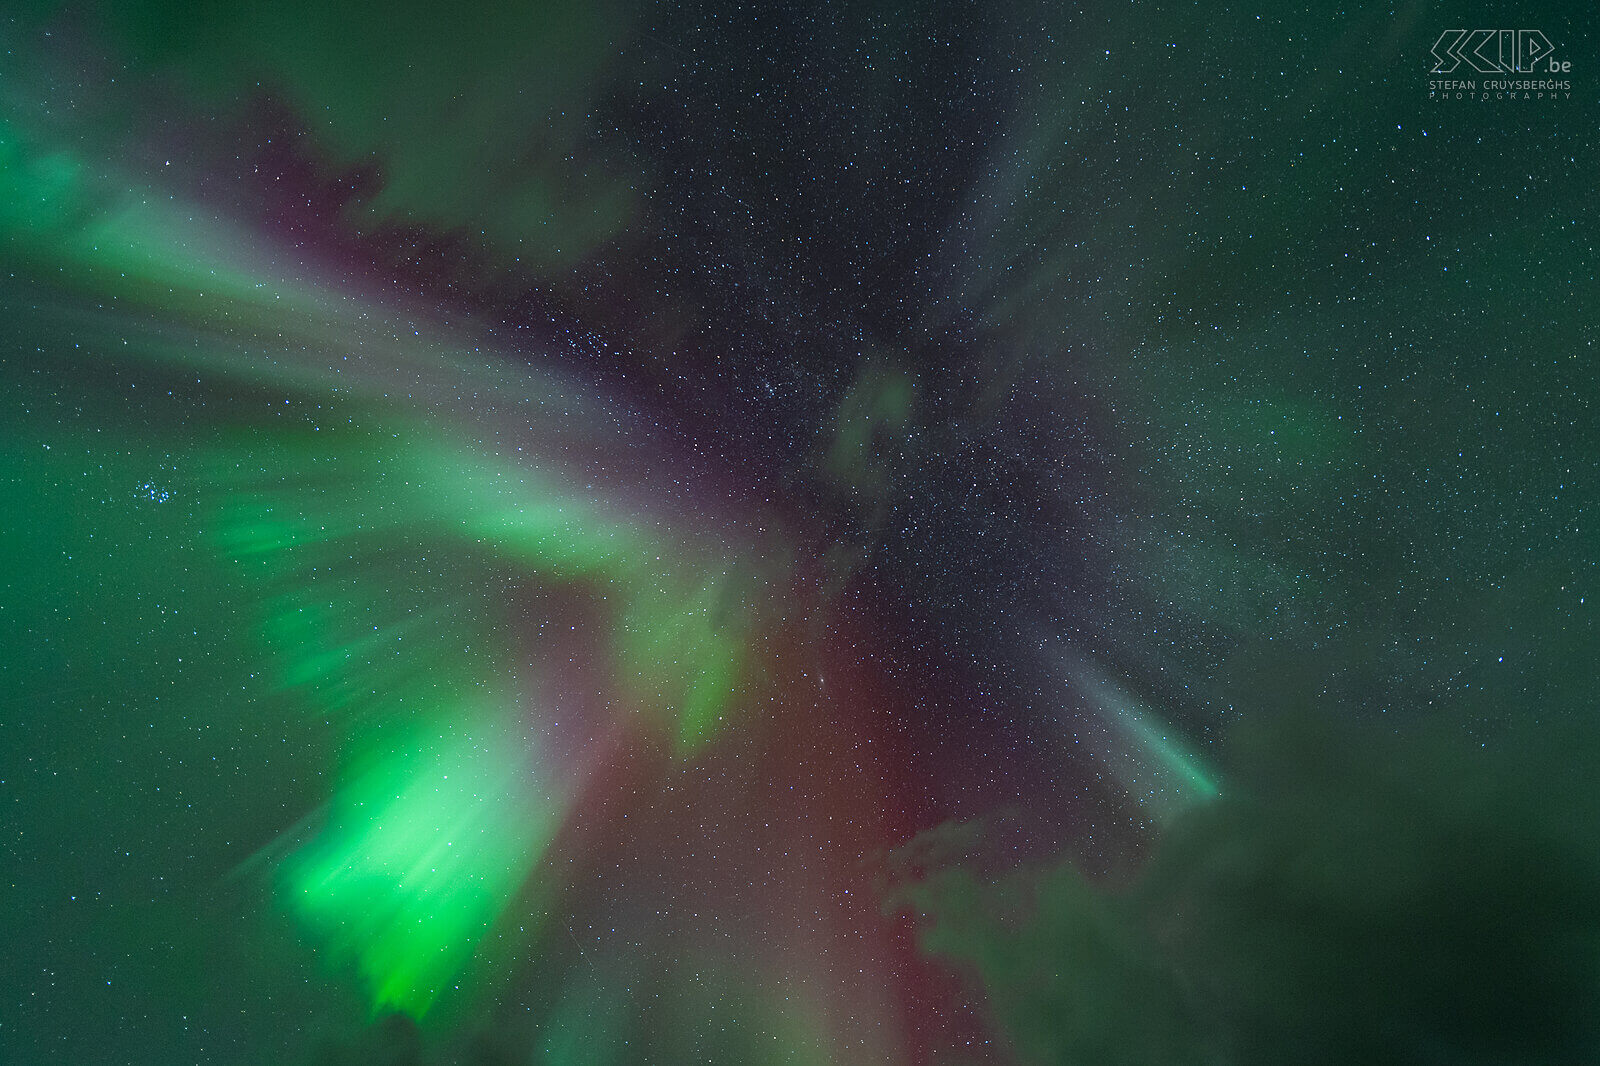 Oteren - Northern lights corona One of the most impressive forms of northern lights or aurora borealis is when a corona, or crown, is formed high up in the sky. It changed so rapidly with bright green and red colors. Stefan Cruysberghs